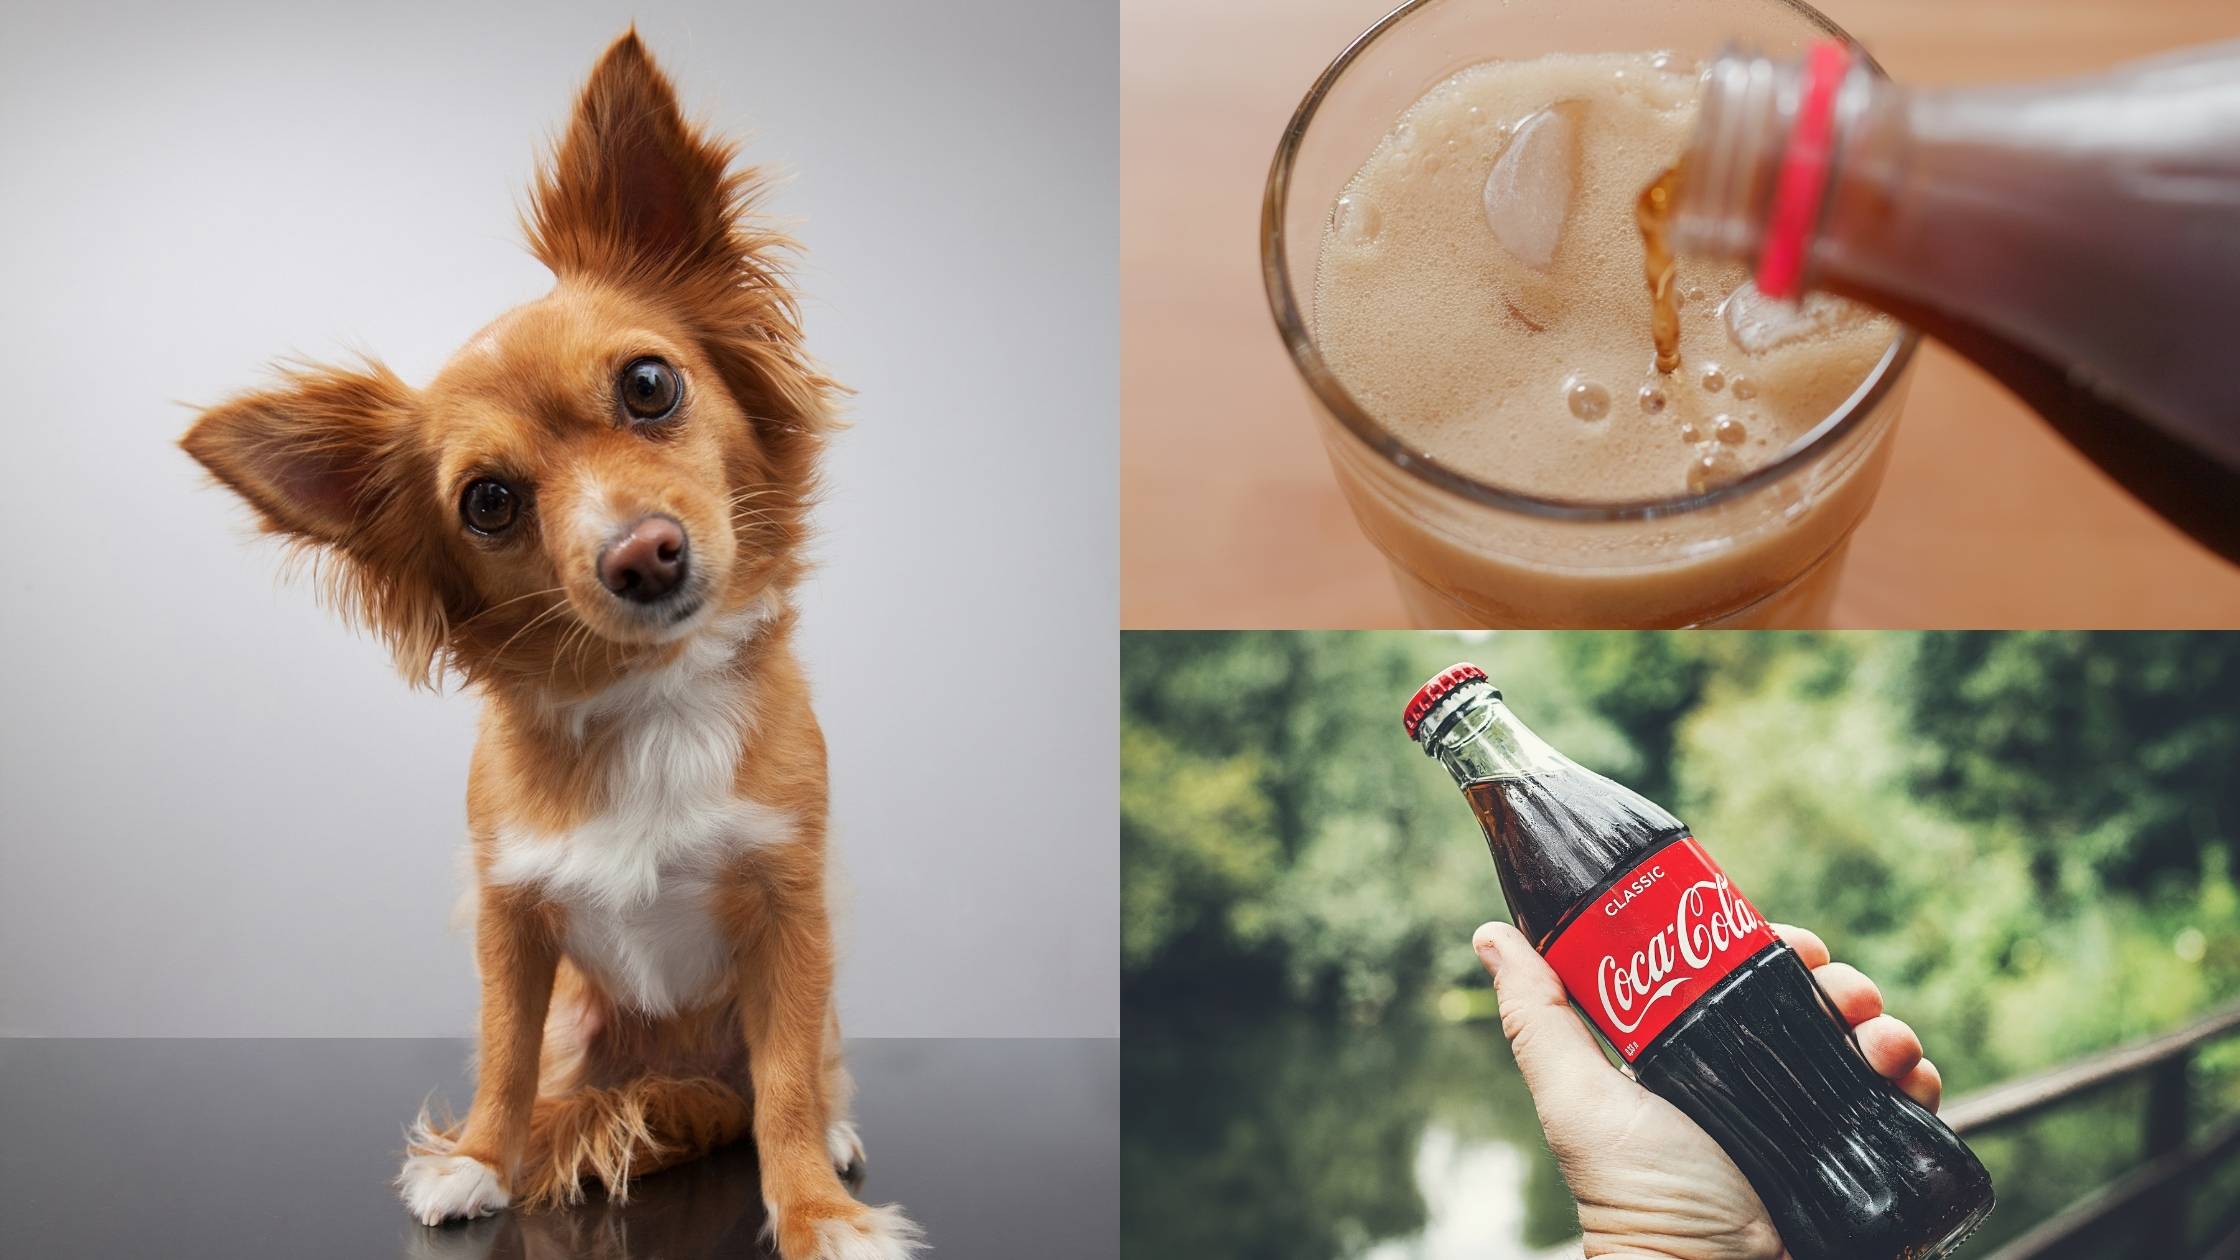 Can Dogs Drink Soda